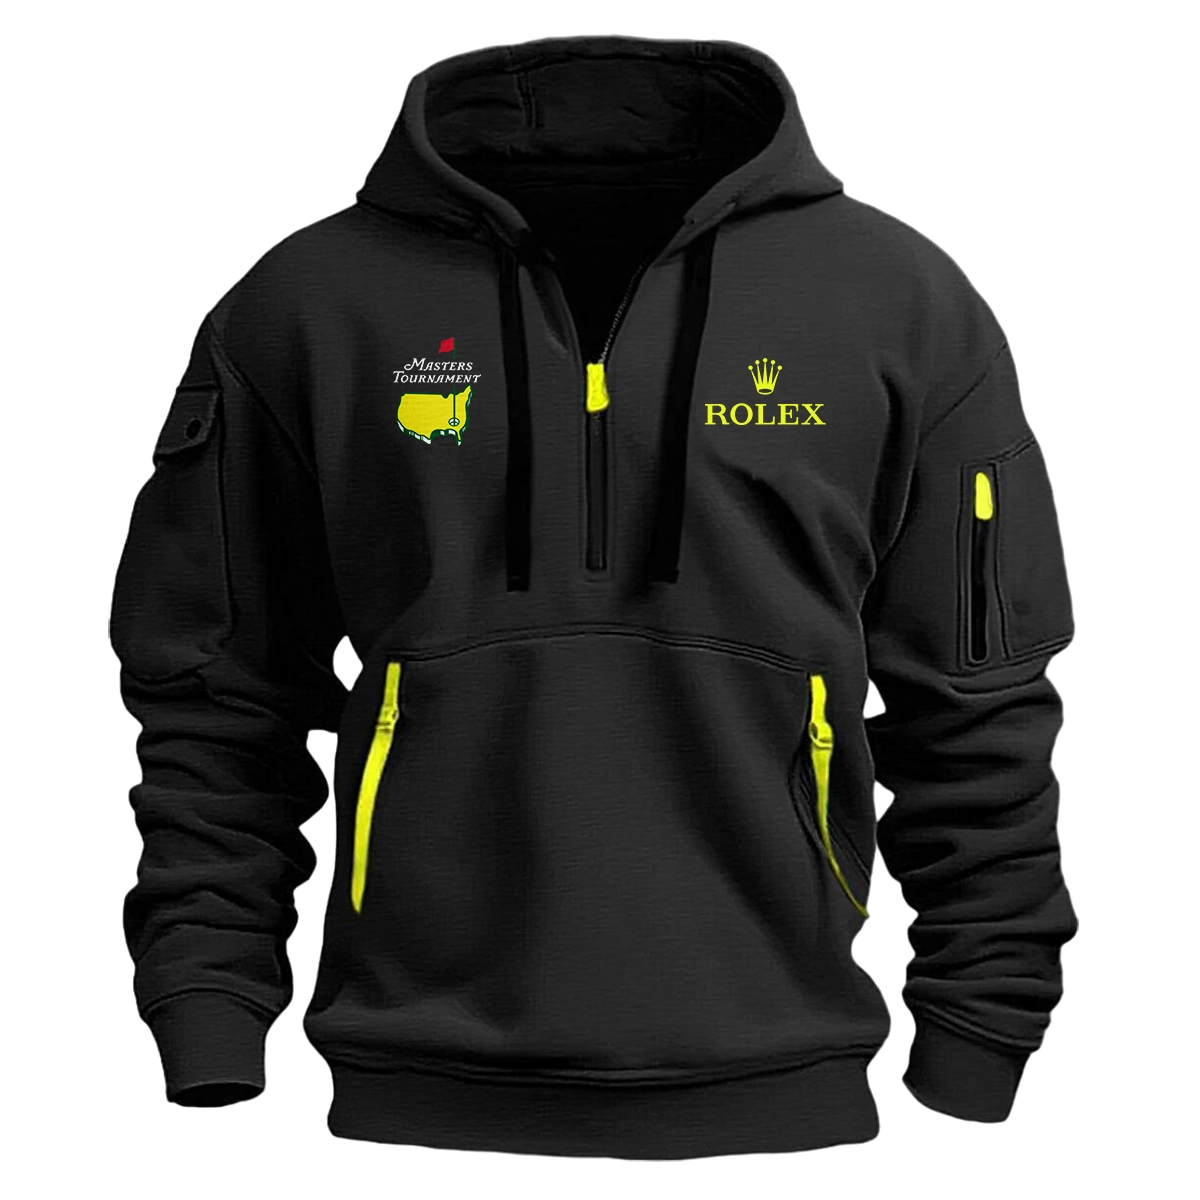 Rolex Fashion Hoodie Half Zipper Masters Tournament Gift For Fans For Father Husband